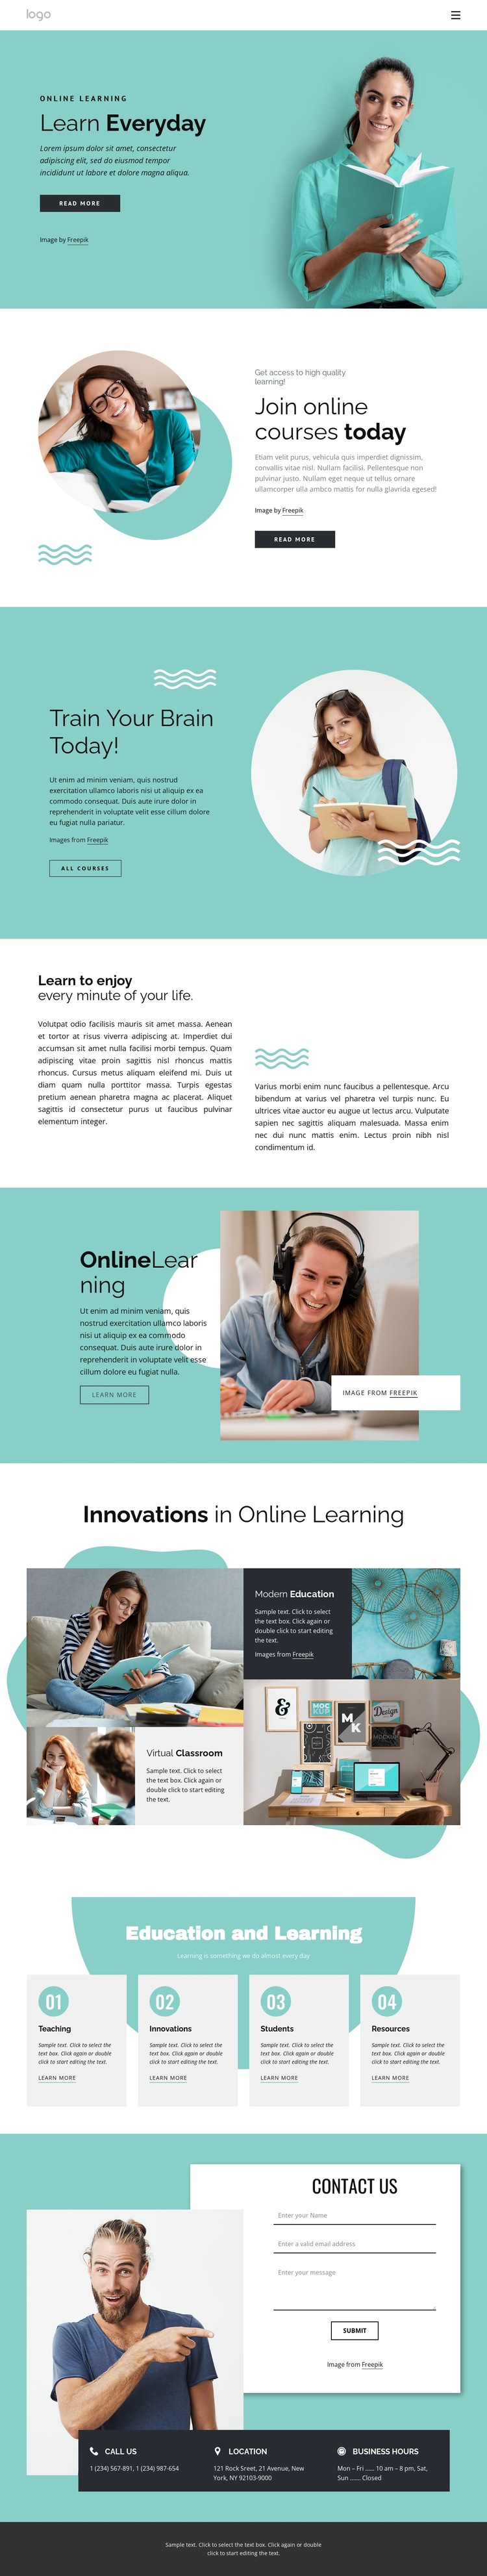 Learning is a lifelong process HTML5 Template